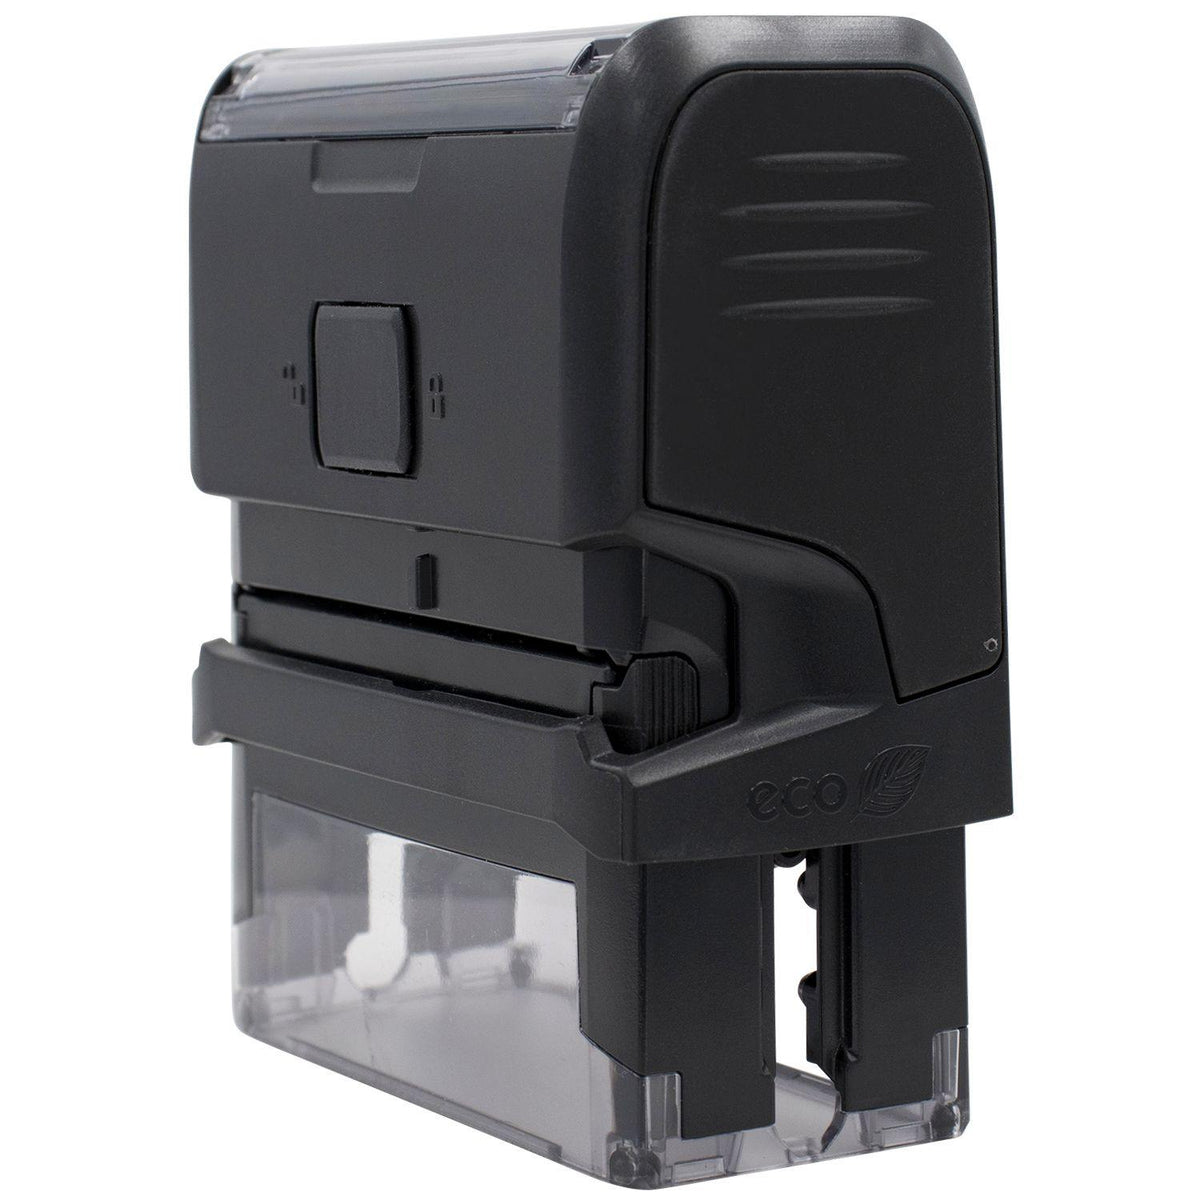 Side View of Large Self-Inking Bold Shred Stamp at an Angle